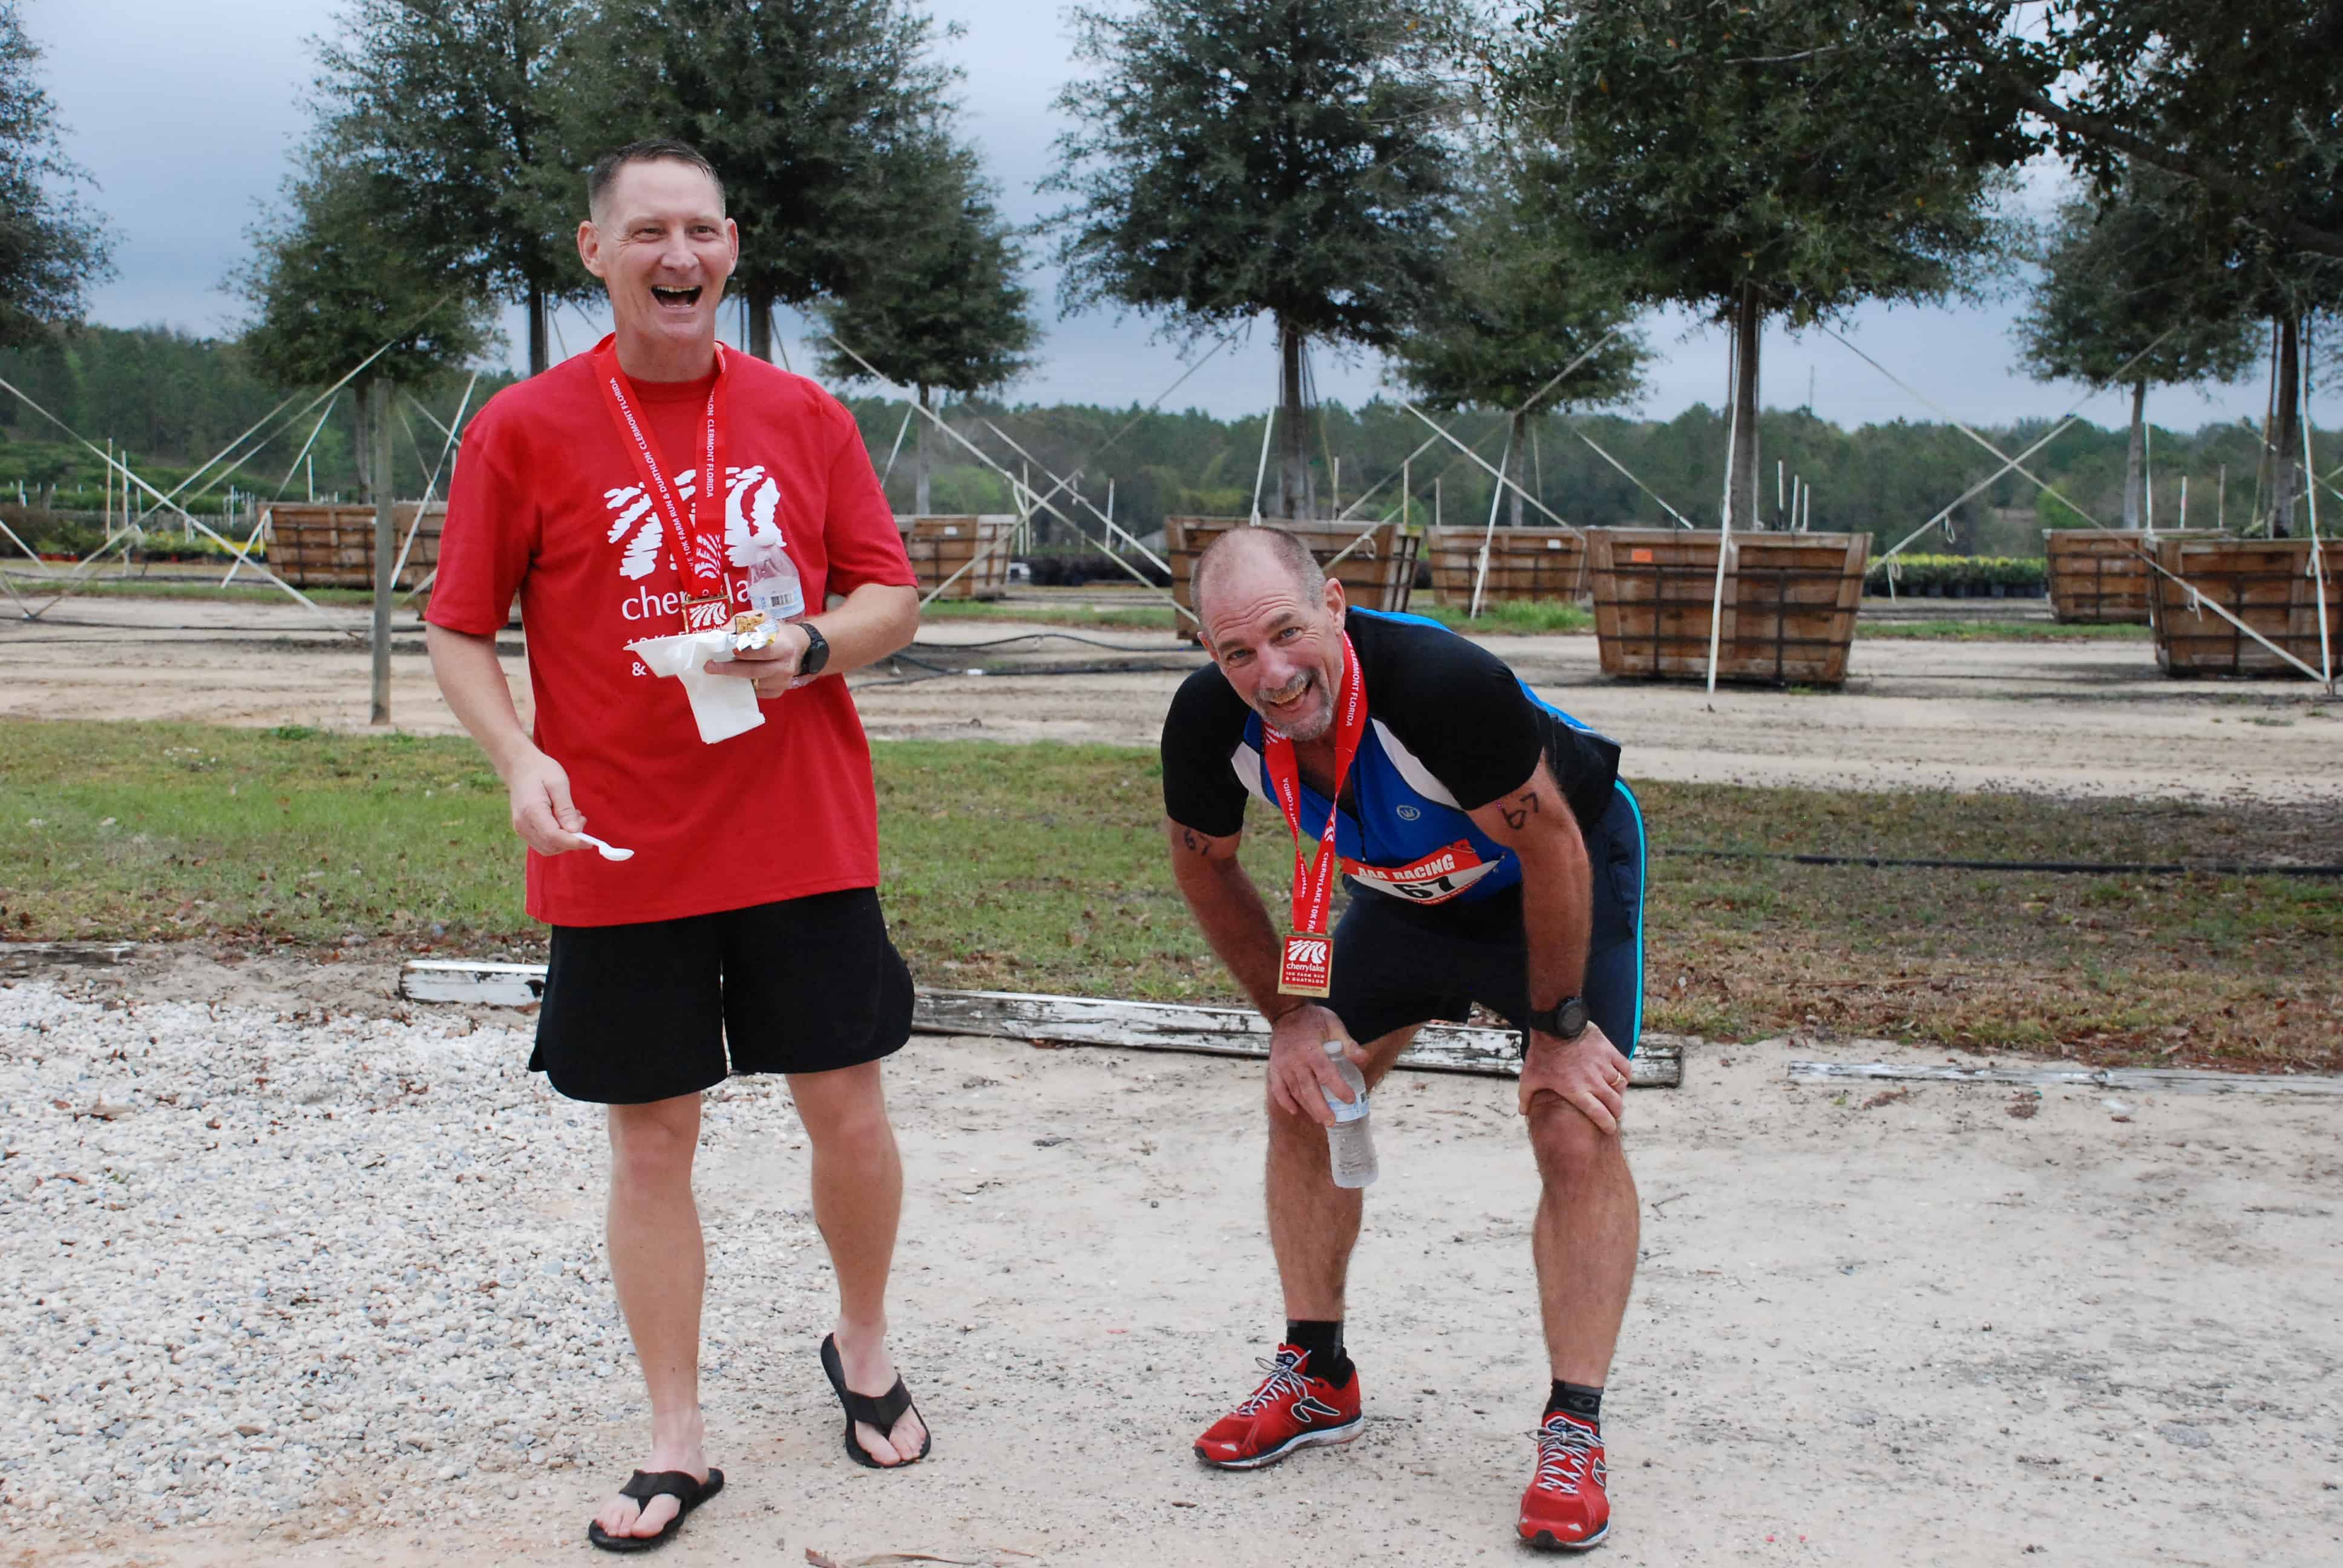 Two men laughing after completing the race.